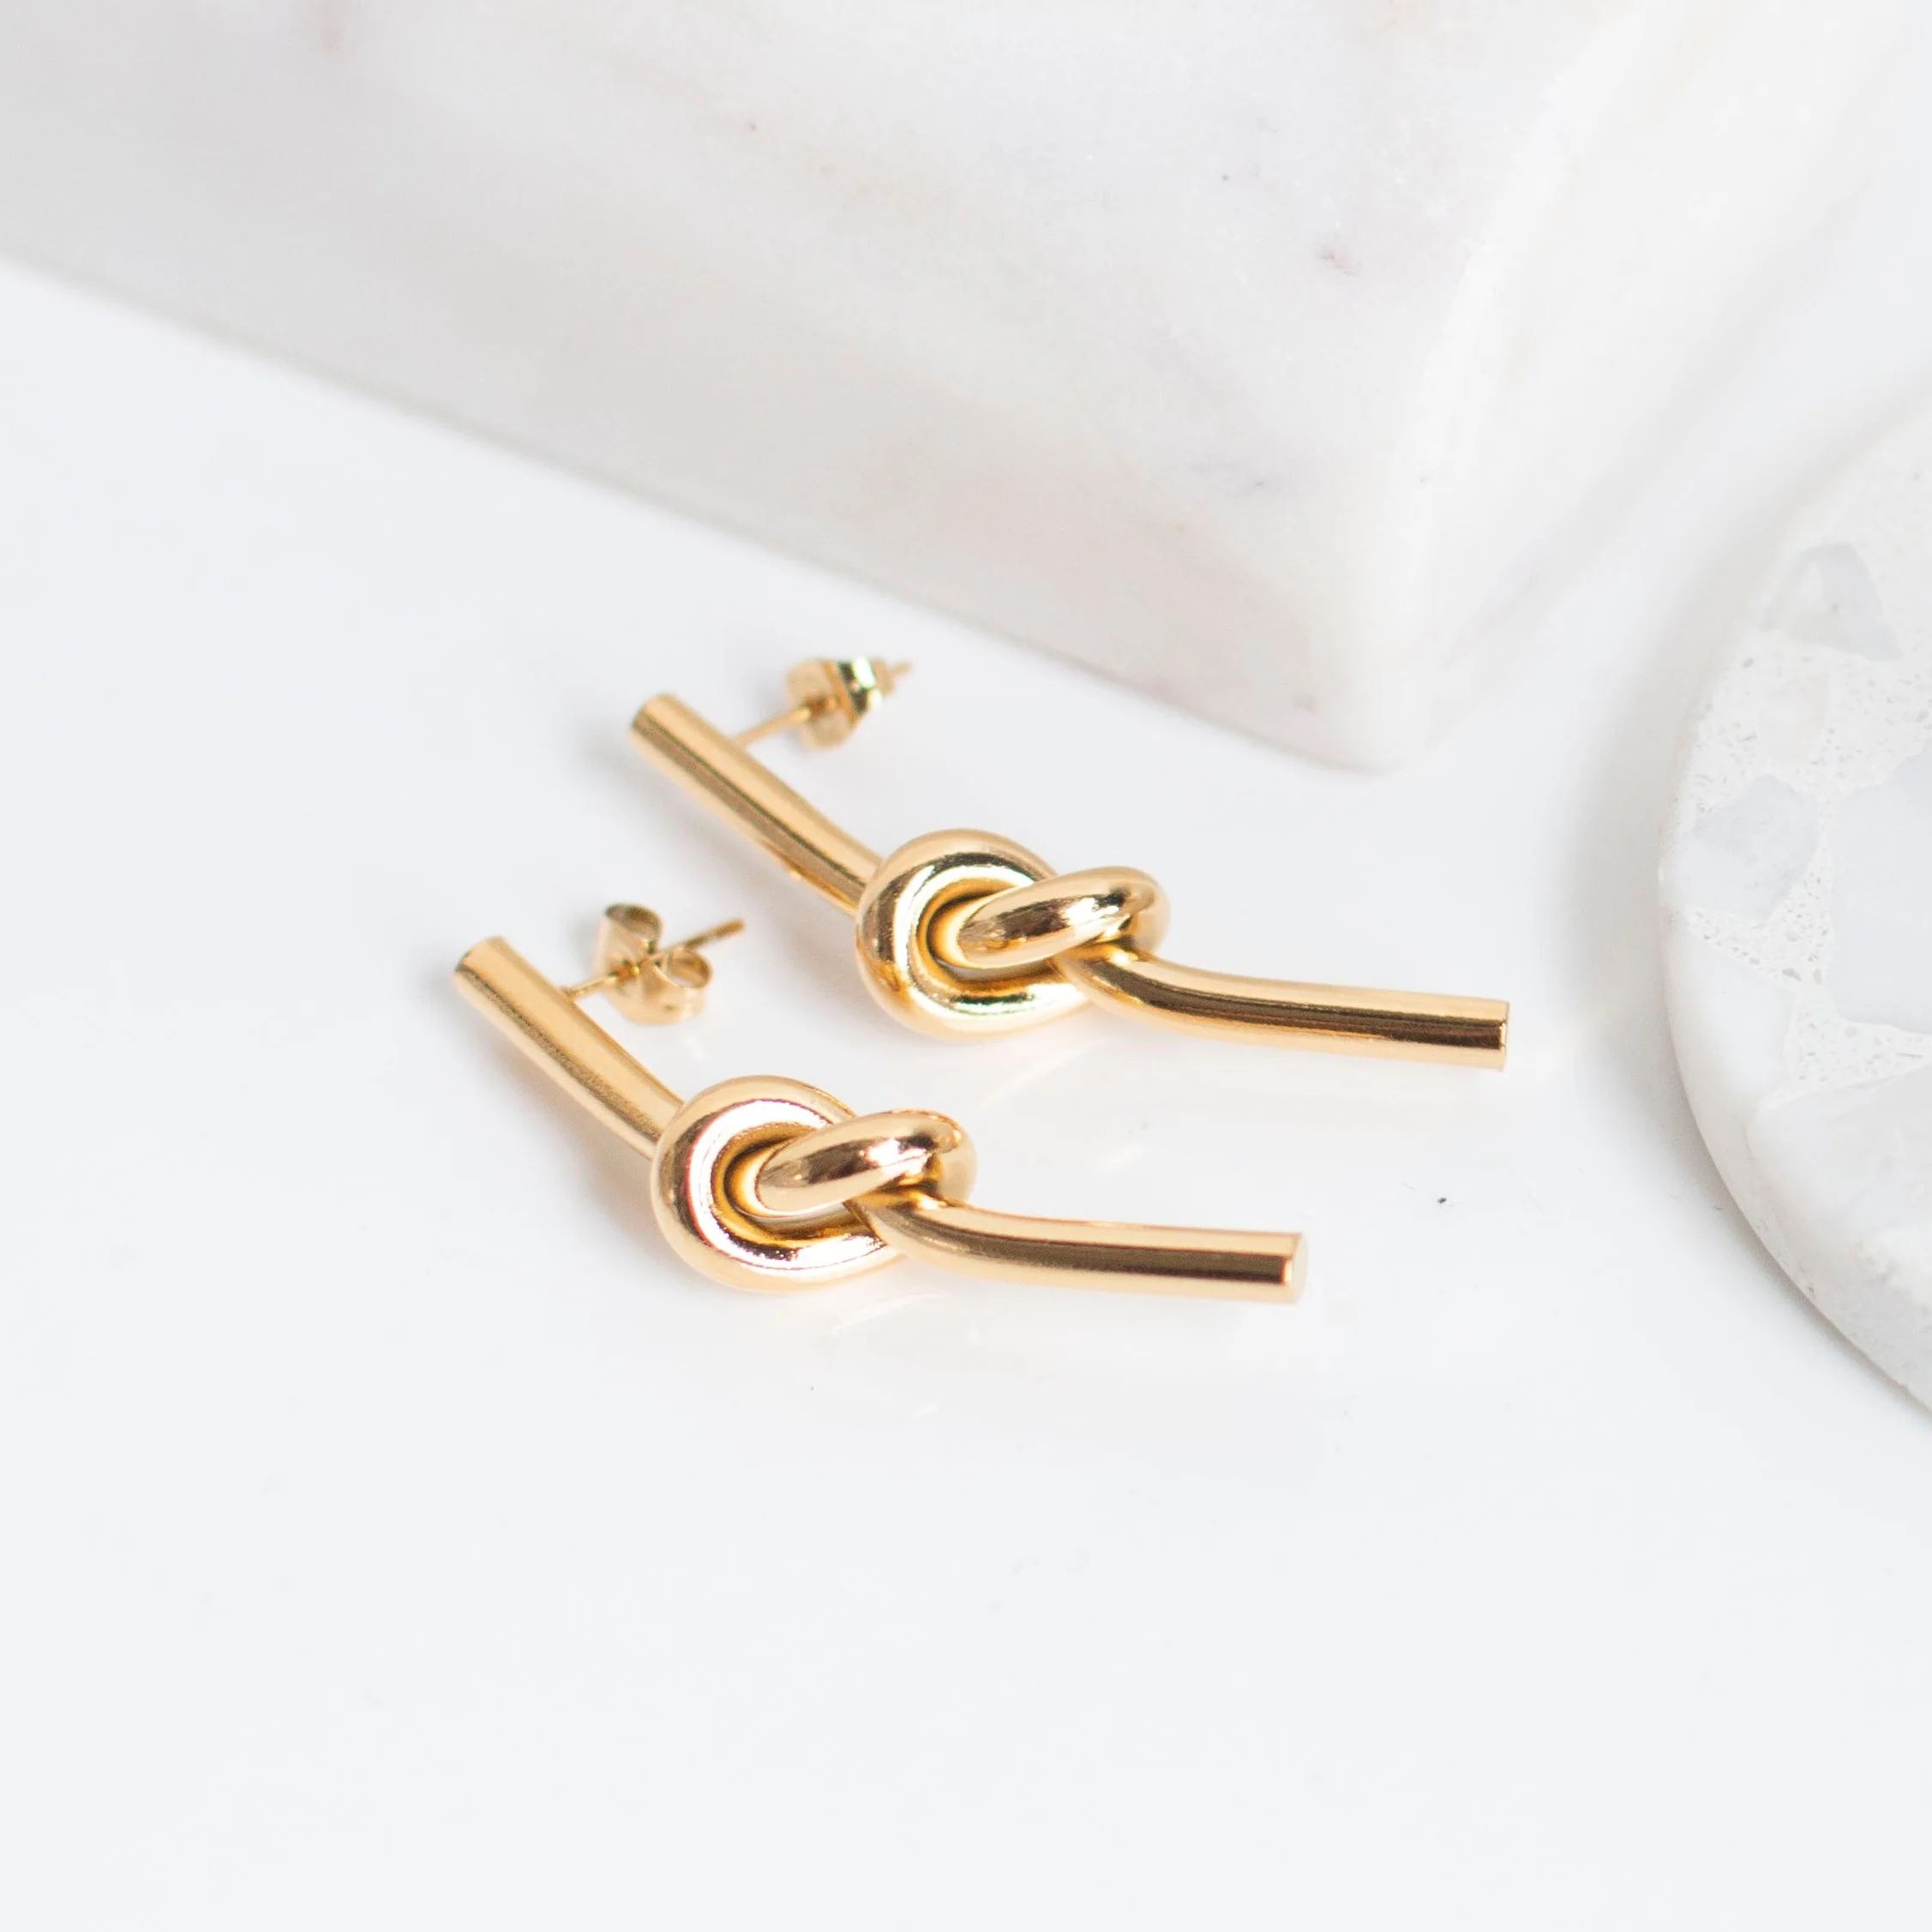 Stacy Knotted Gold Earrings | Victoria Emerson